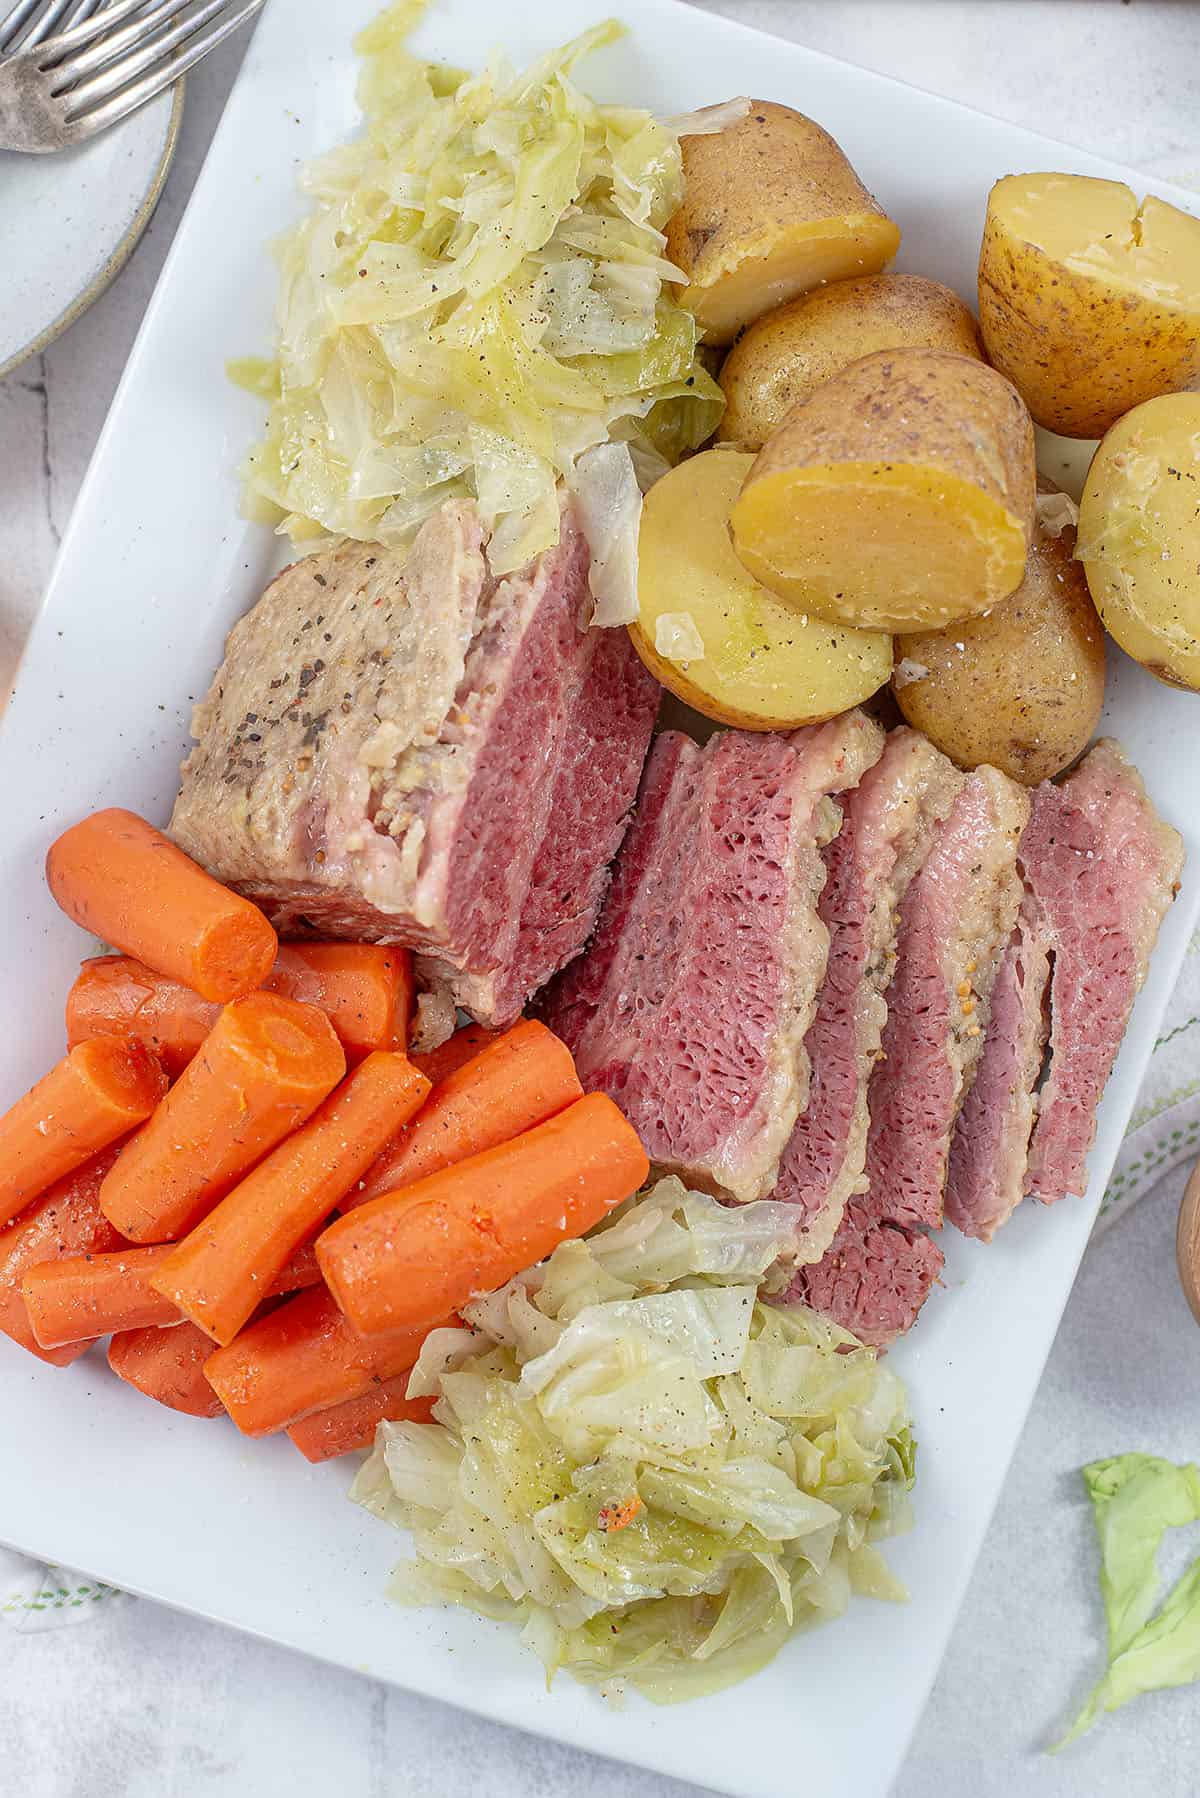 platter filled with corned beef, cabbage, carrots, and potatoes.